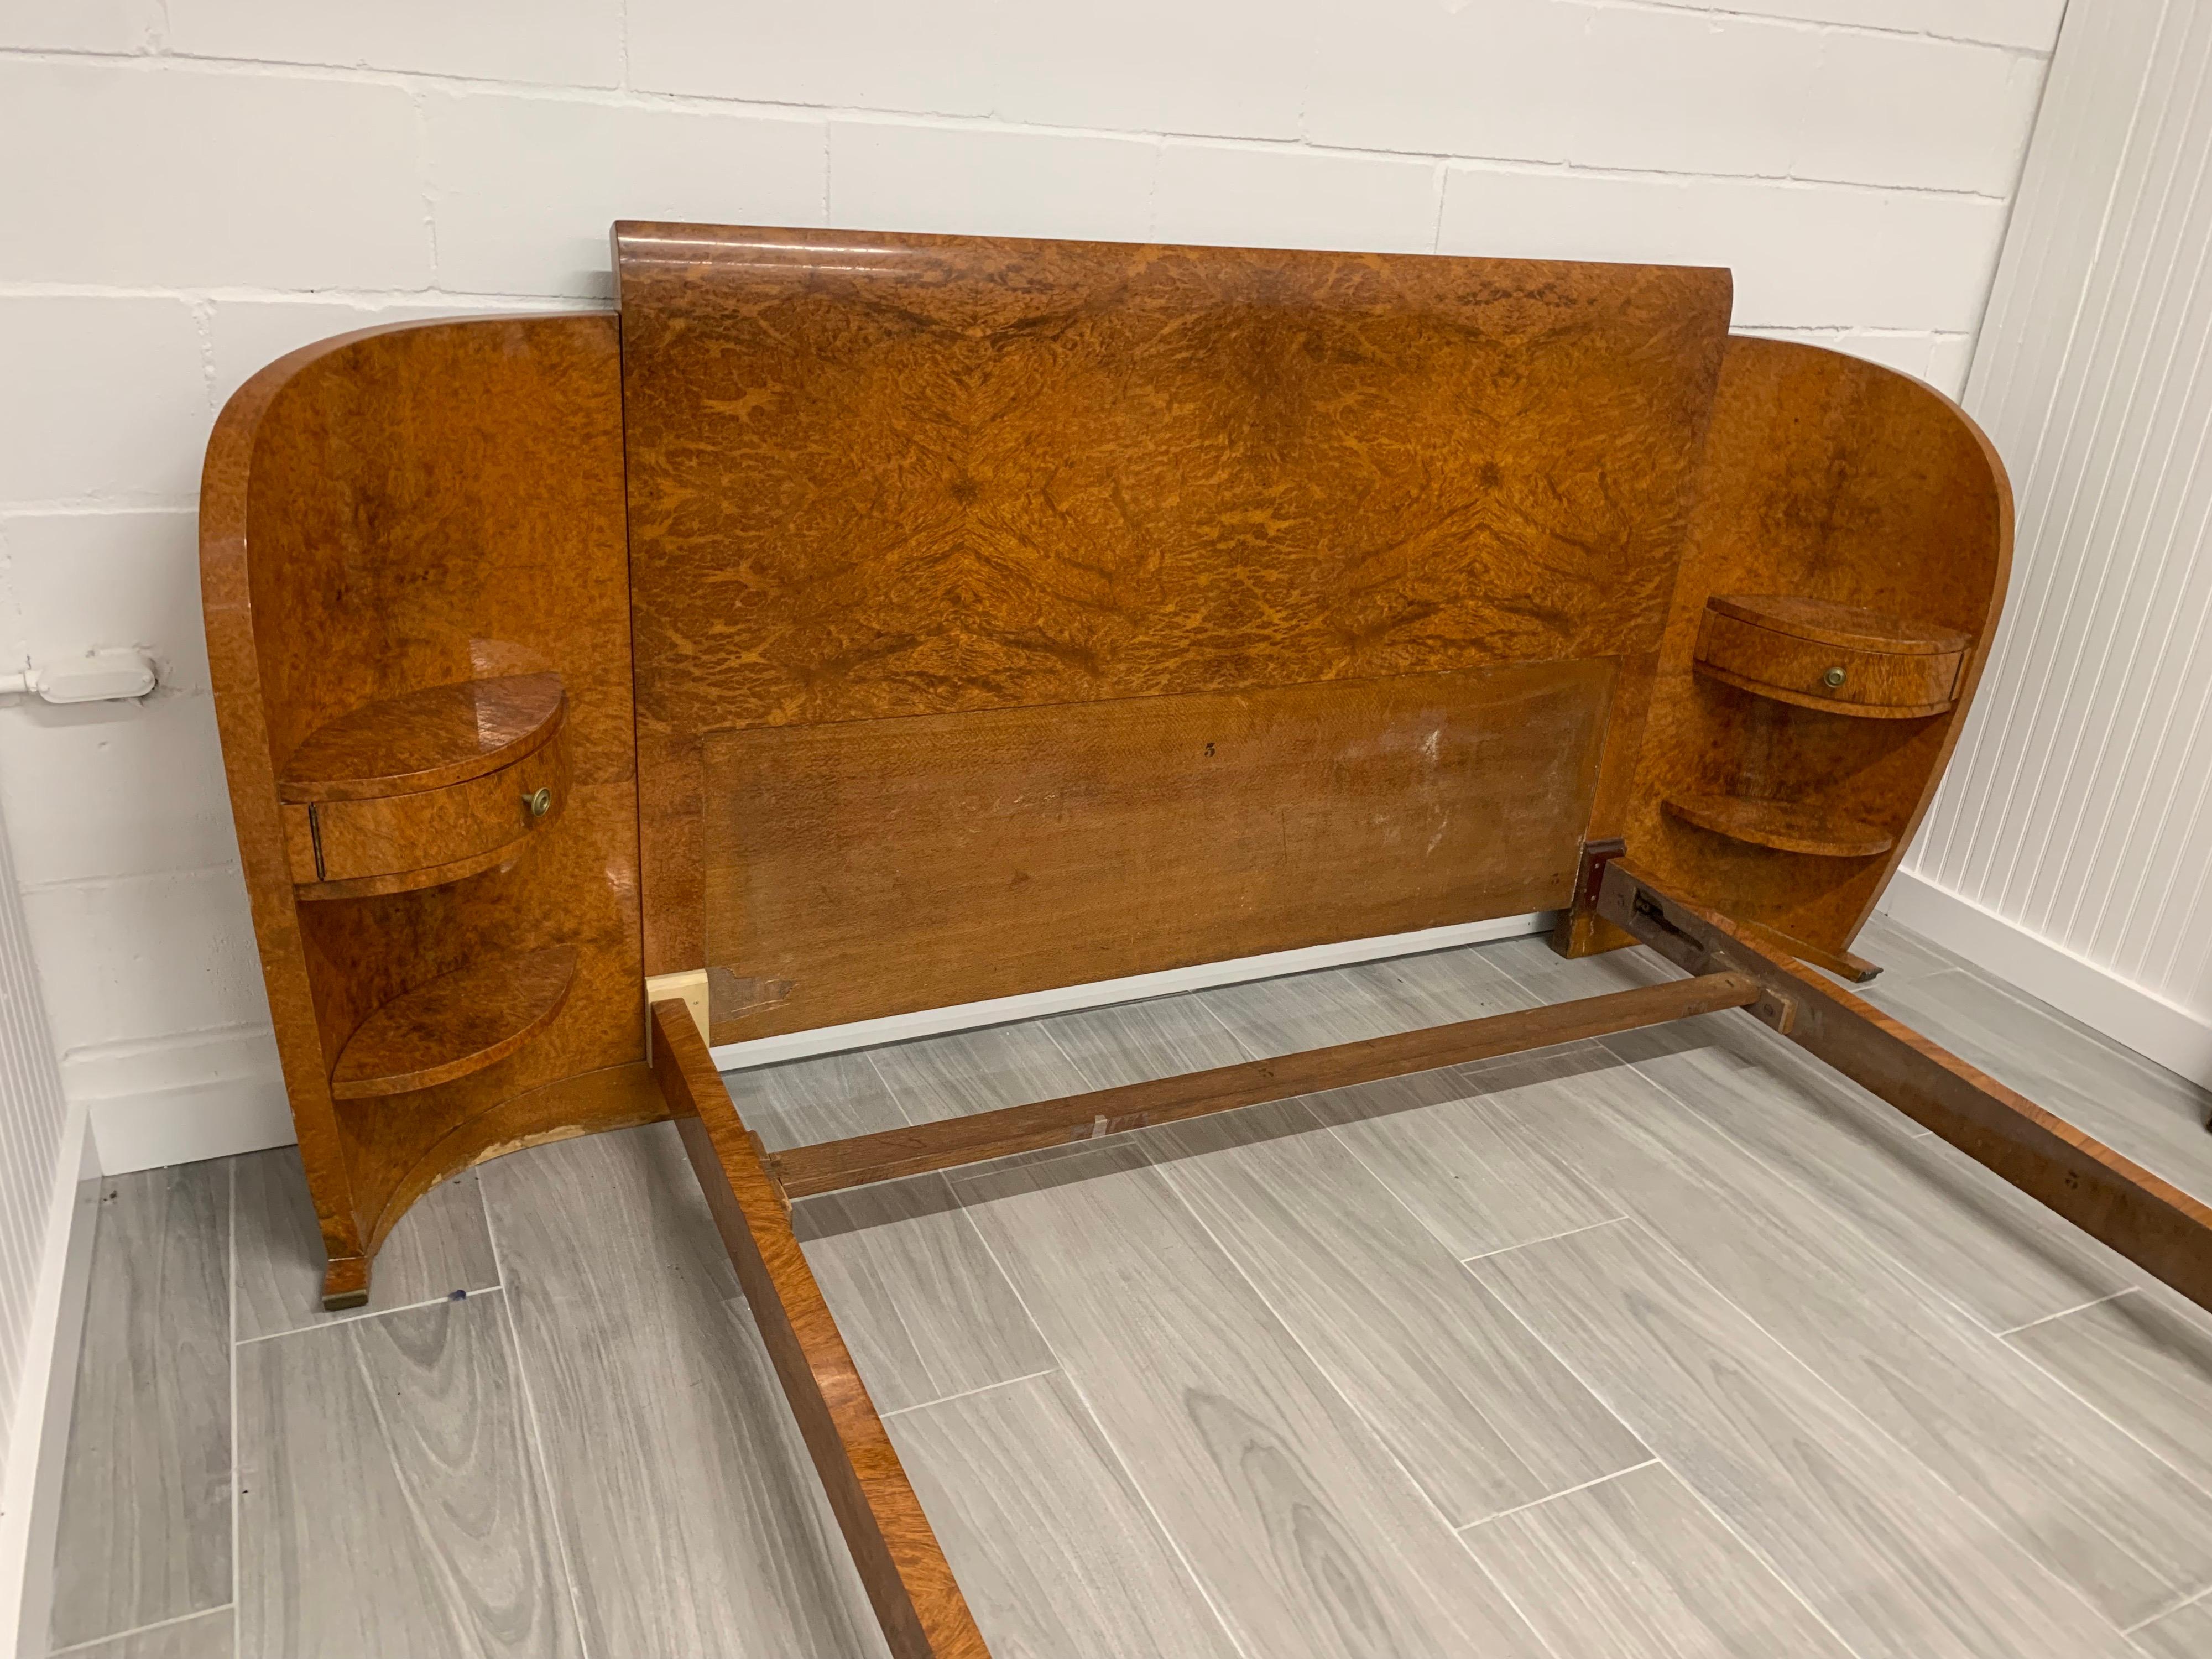 Stunning burl Art Deco queen size been as shown. Complete with built-ins at headboard. Comes with rails/headboard and footboard. All dimensions are below and the width for just the mattress/boxspring is 59